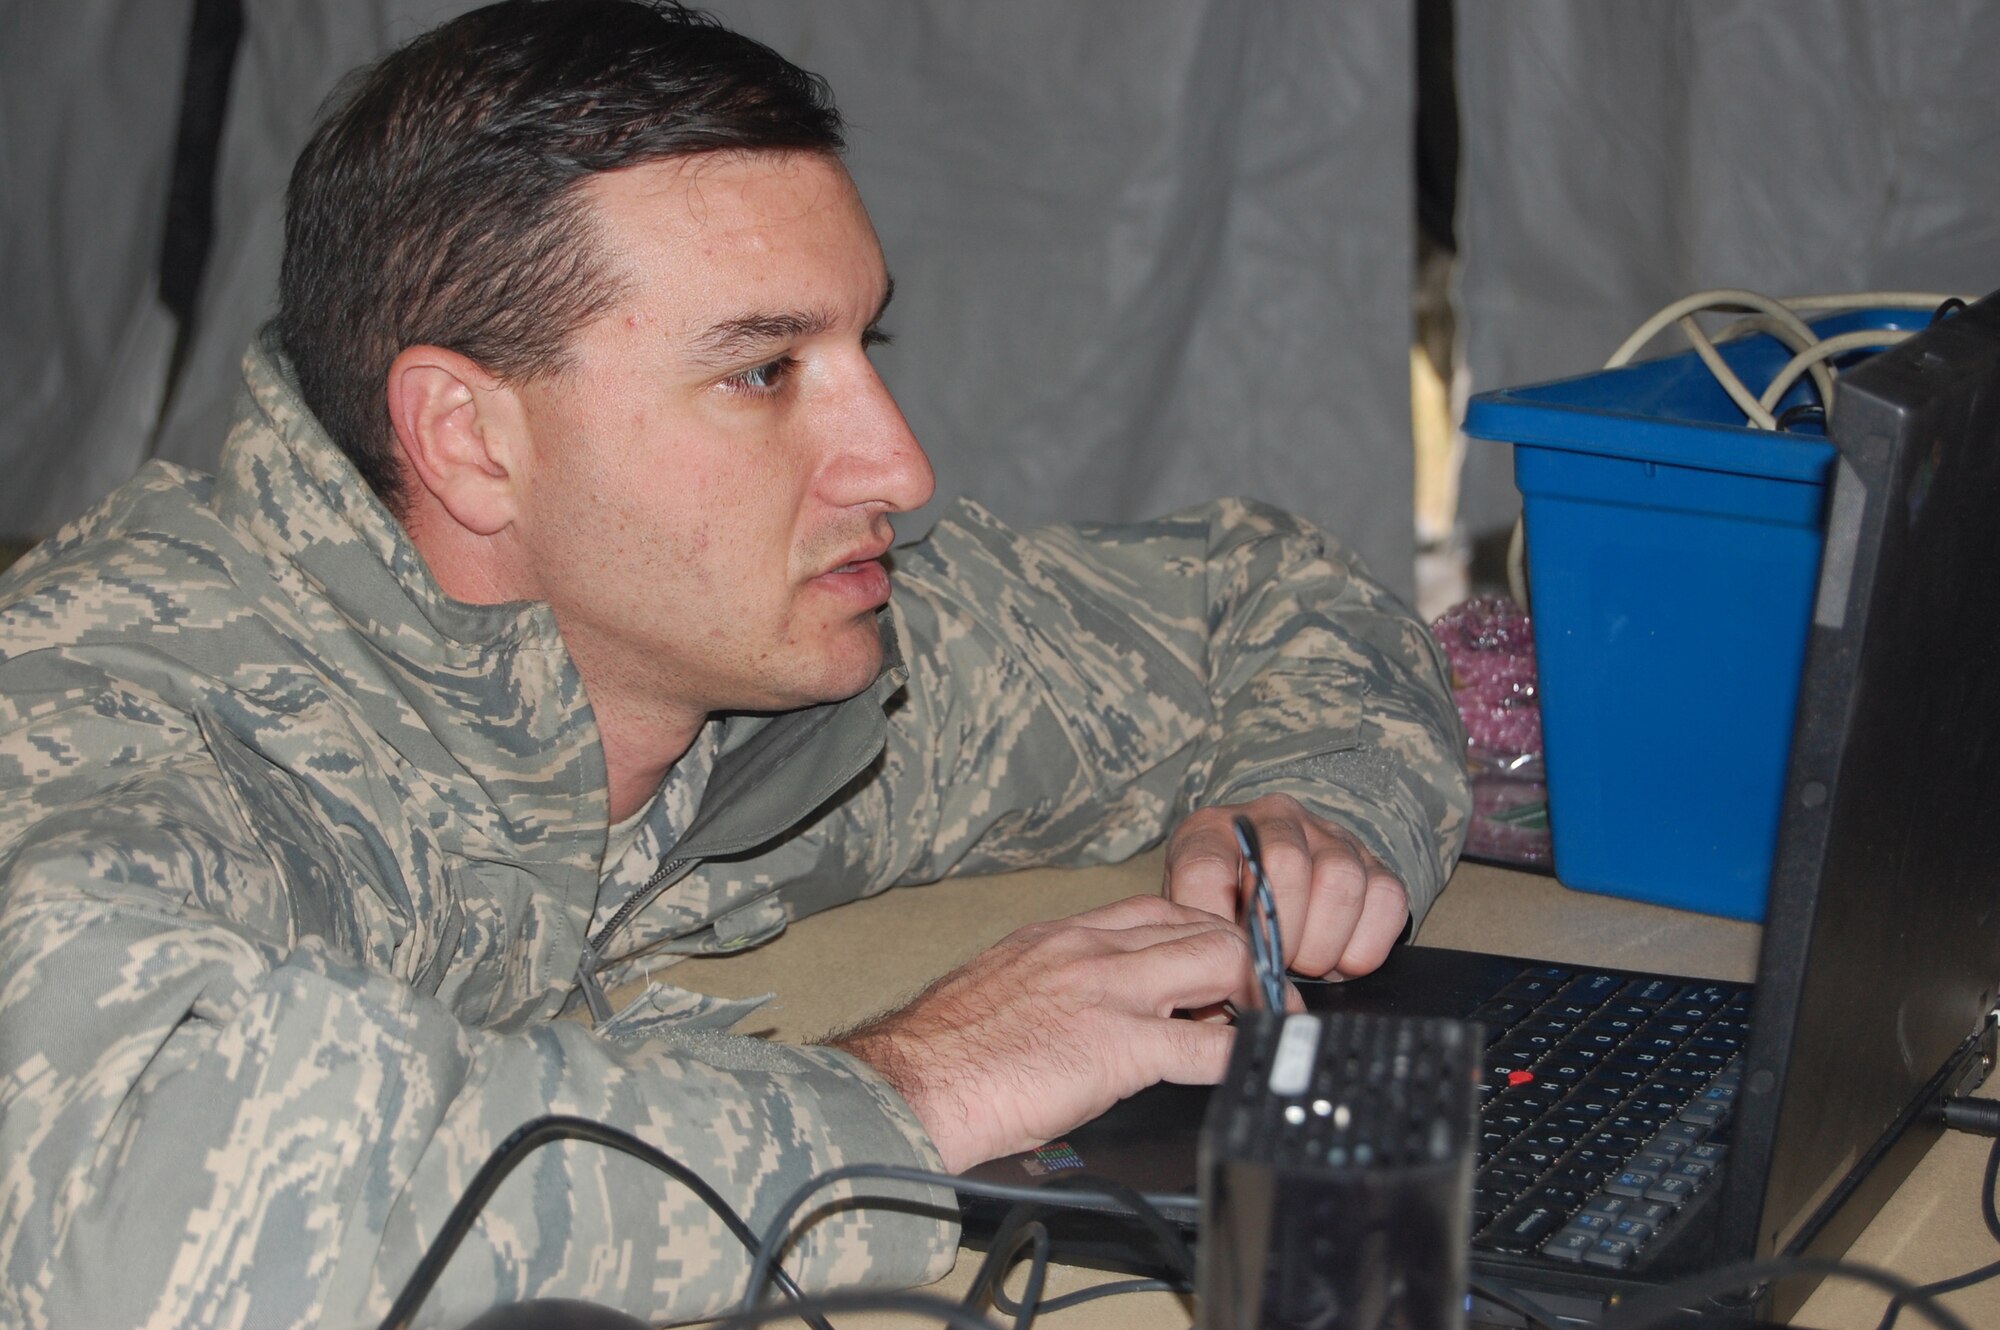 Tech. Sgt. Robert Luongo, 341st Communications Squadron network administrator, tests intranet connectivity after setting up computers in a tent Oct. 1, 2009, on the flight line during a Response Task force exercise. (U.S. Air Force photo./Airman 1st Class Kristina Overton)